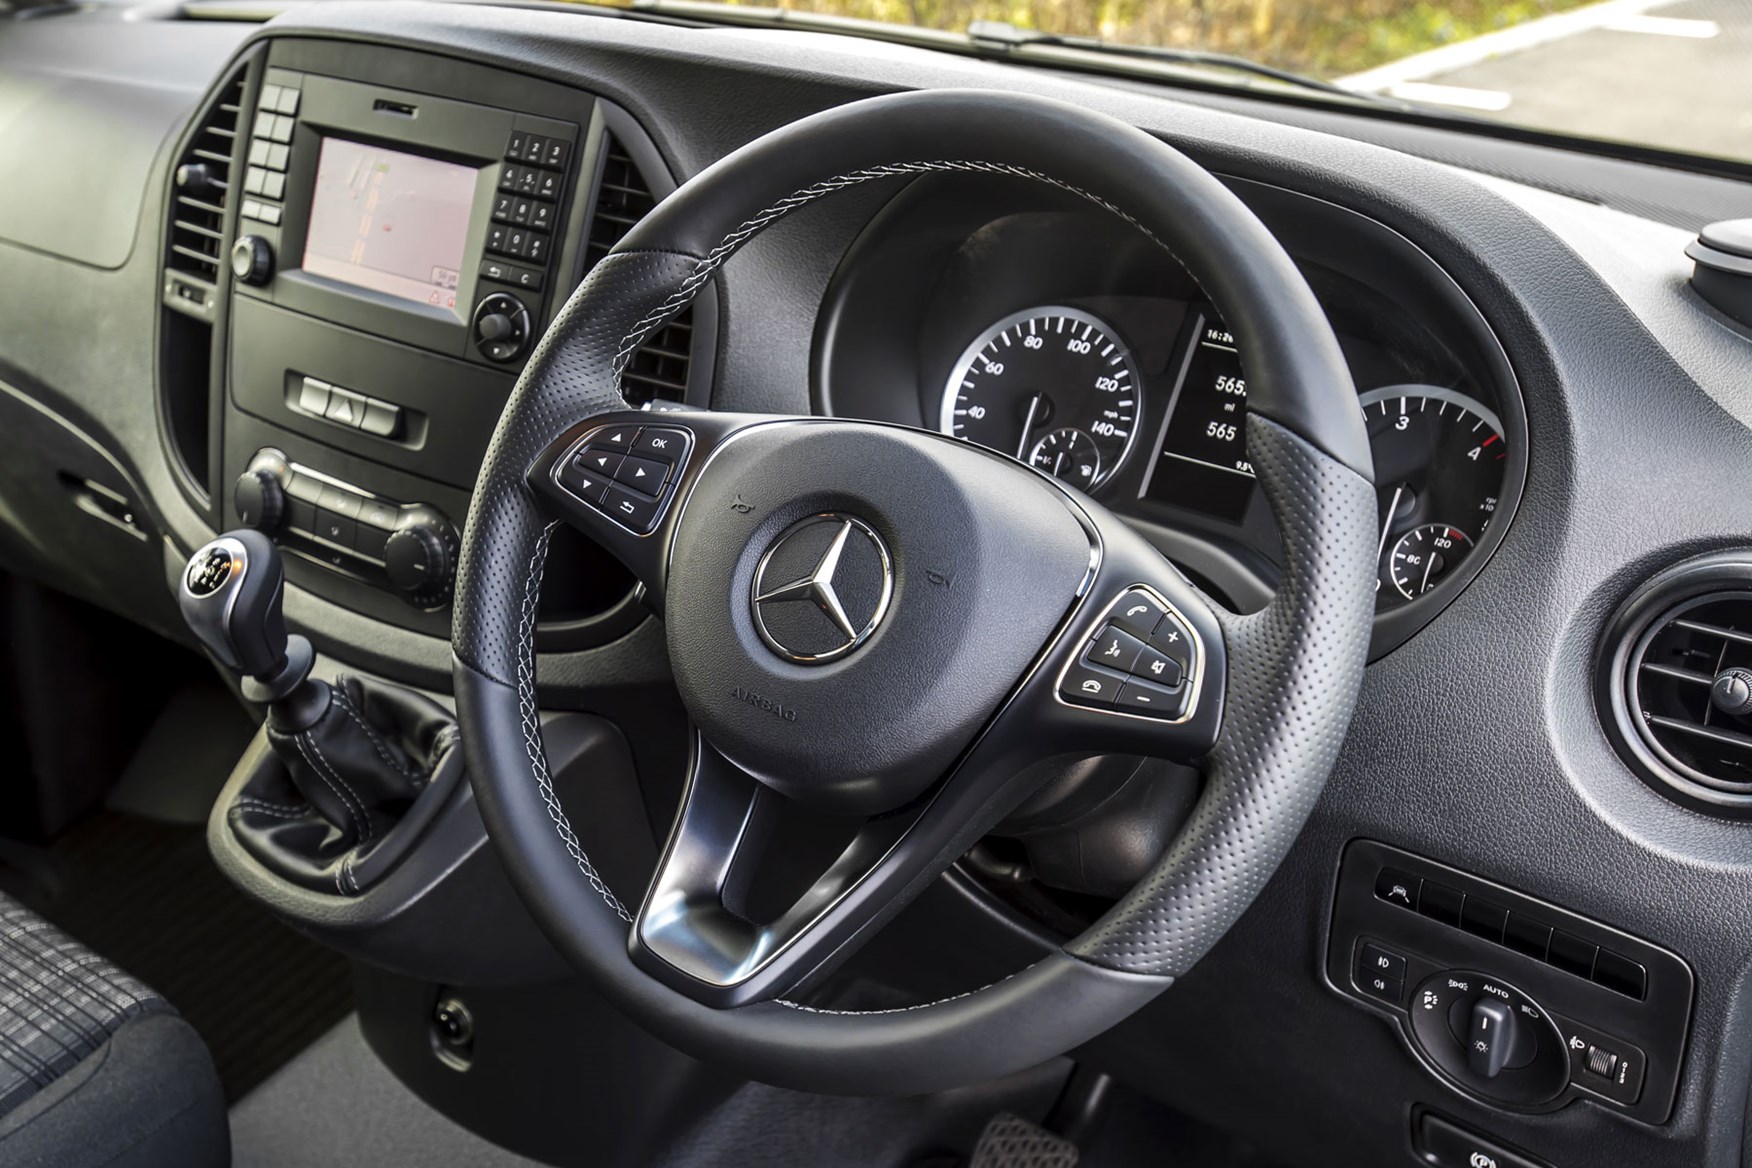 Mercedes-Benz Vito Sport review - dashboard and steering wheel